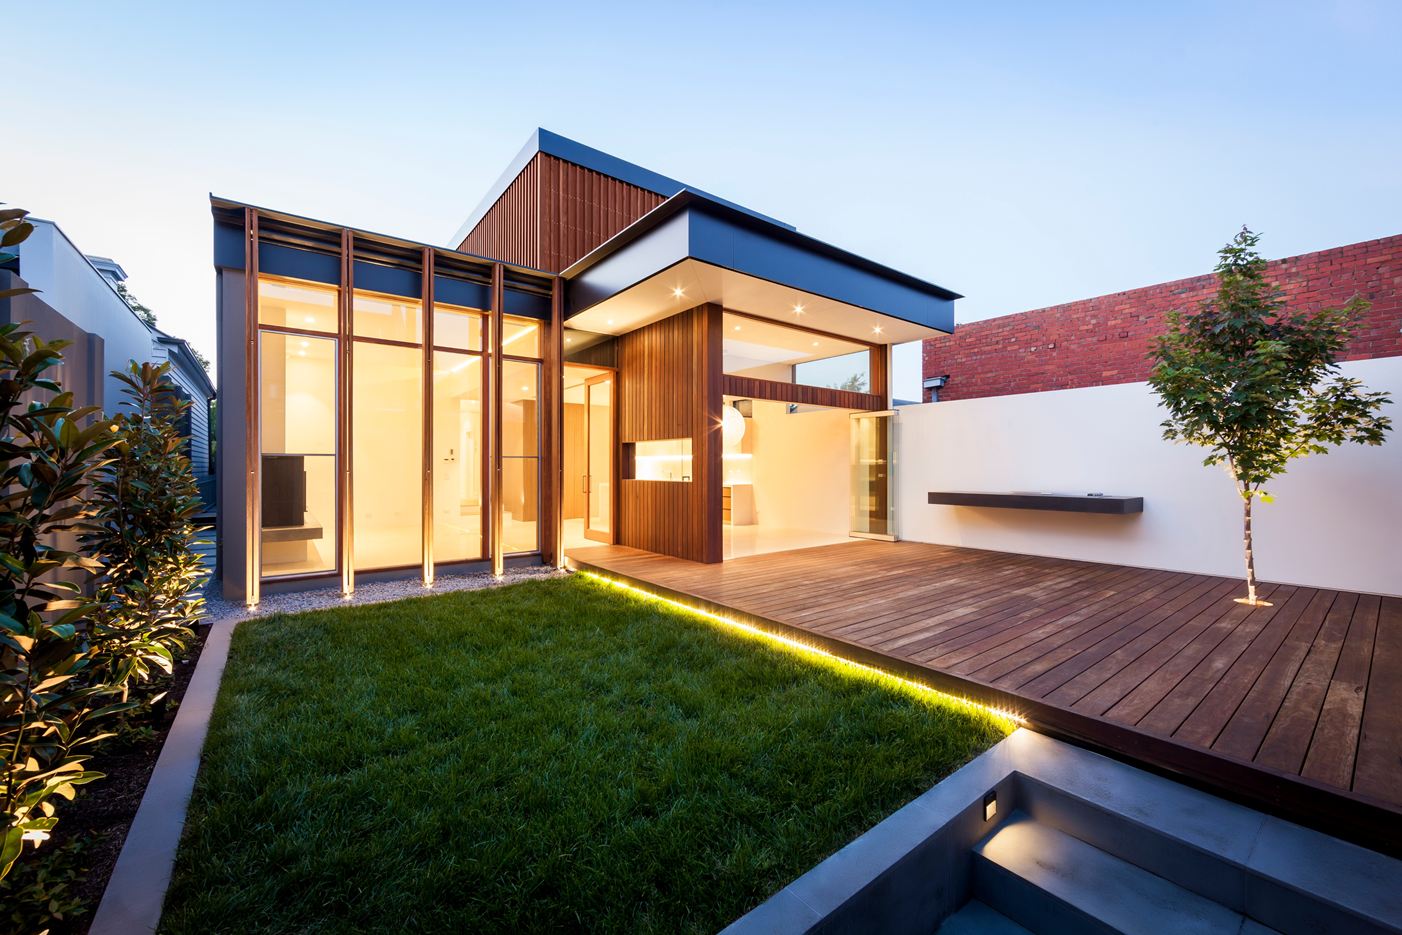 Armadale House 2 in Armadale, Australia by MITSUORI ARCHITECTS